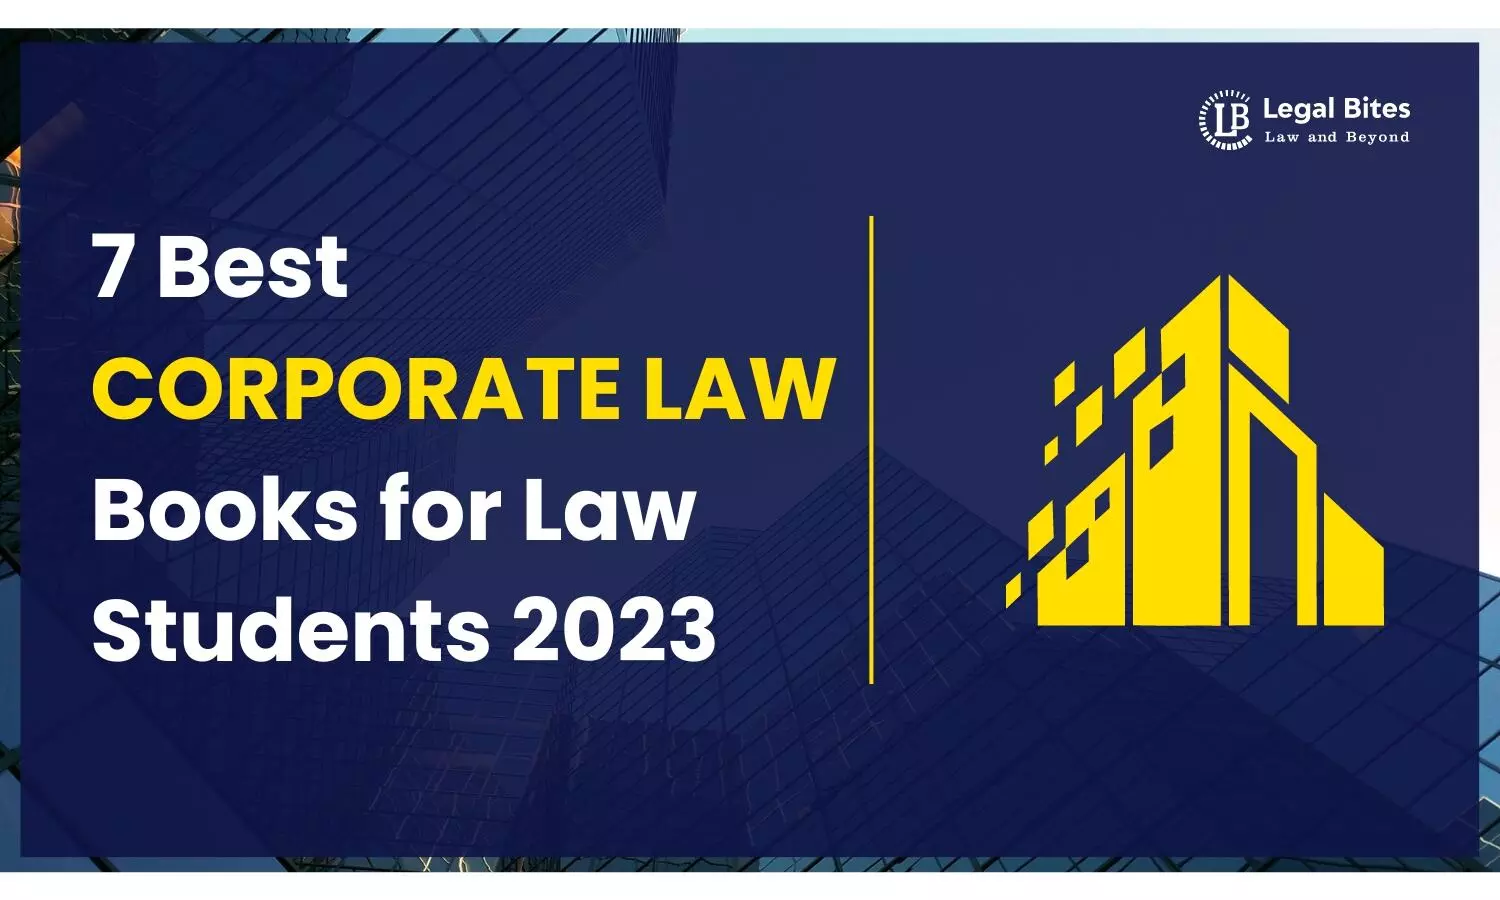 7 Best Corporate Law Books for Law Students 2023